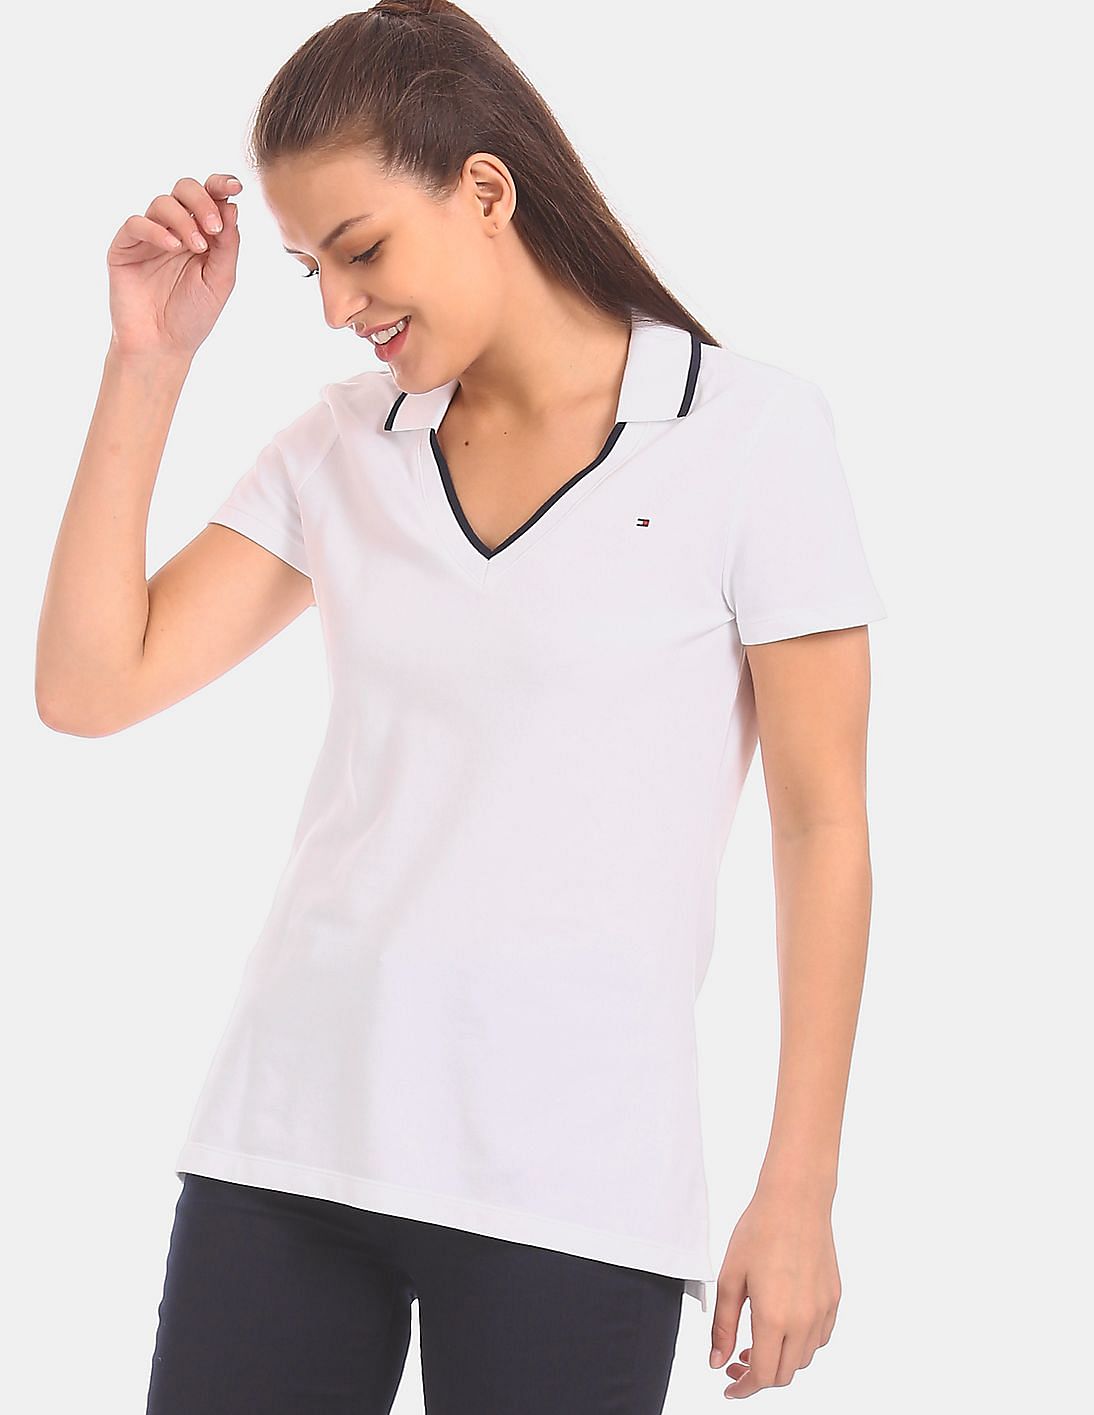 tommy hilfiger polo t shirts women's